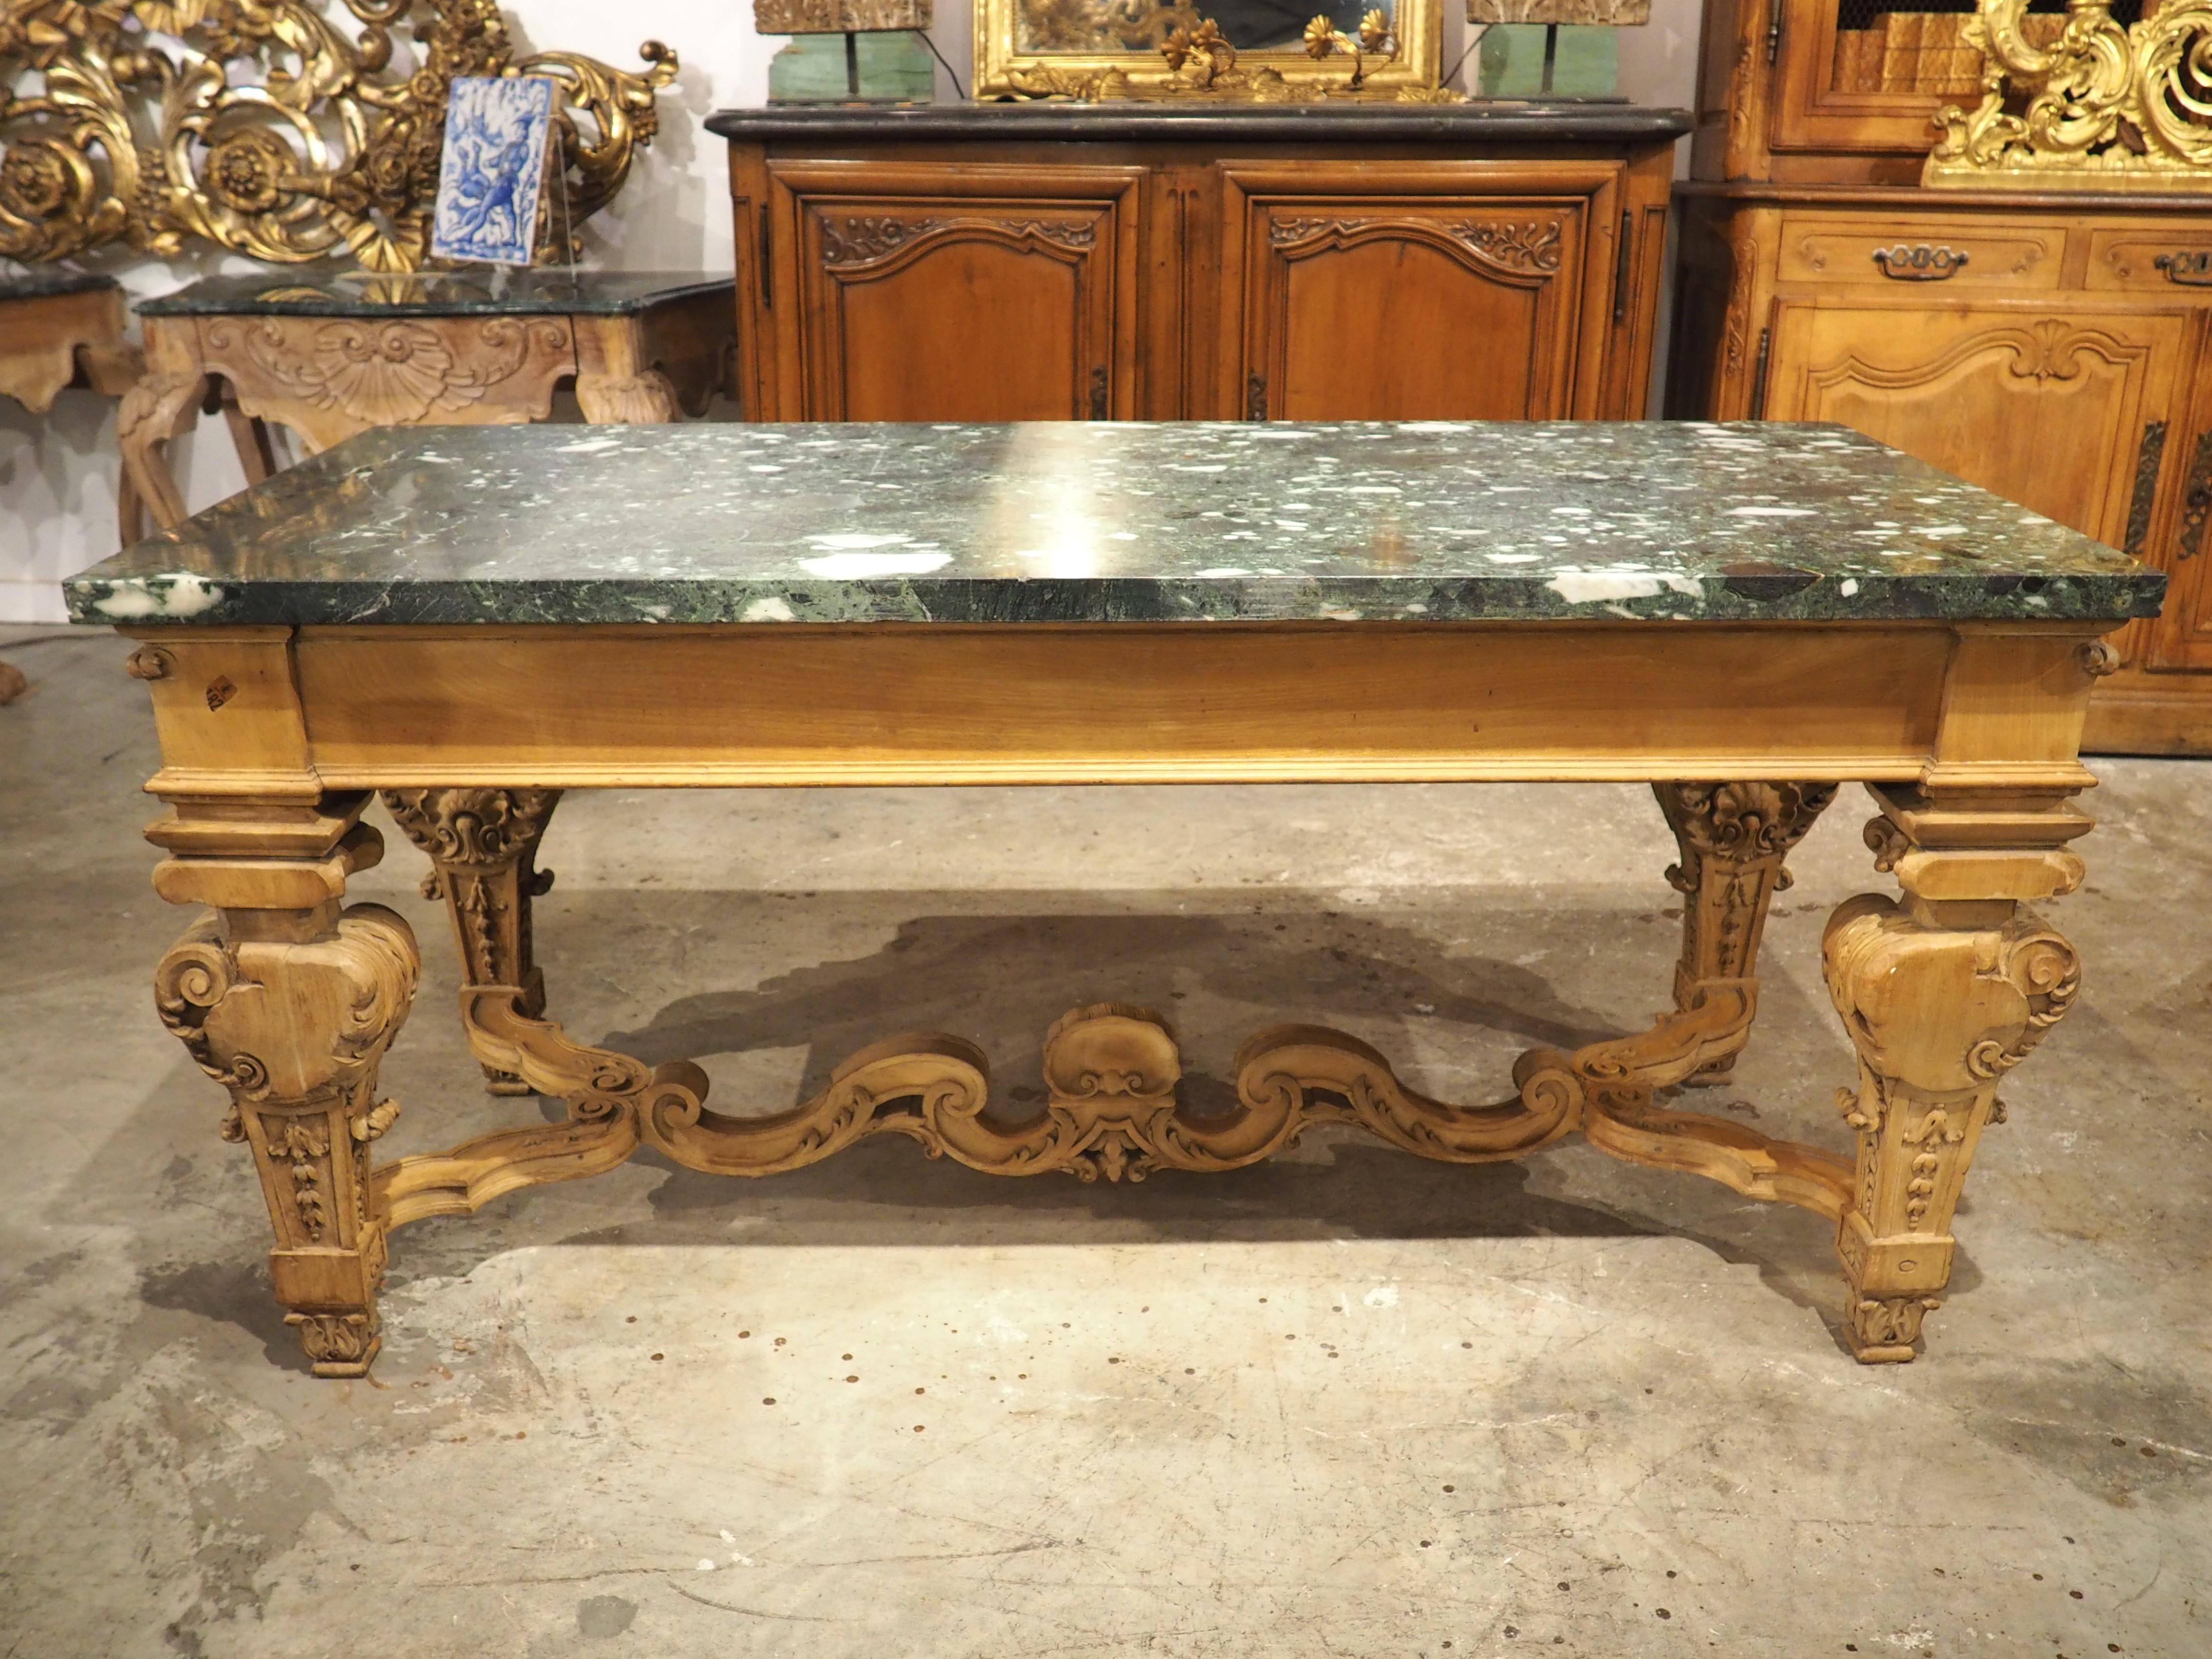 A fantastic table from France, circa 1880, this console has been hand-carved with motifs in the style of Louis XIV. The beautiful blonde walnut wood was carved by a master-level ebeniste, as noted by the delicate foliate latticework surmounted by a